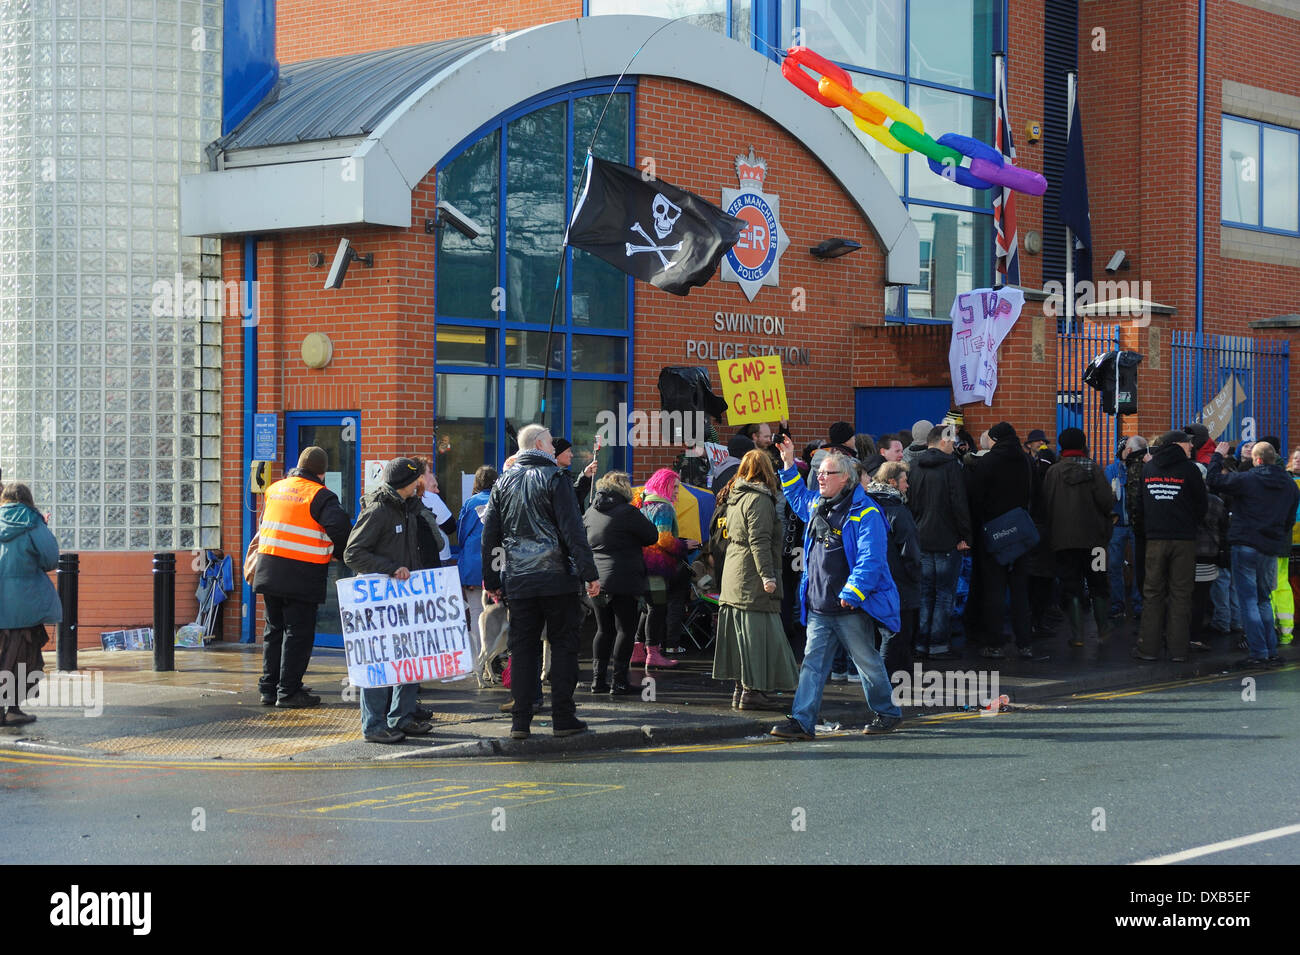 Swinton, Salford, Manchester, UK . 22nd March 2014. Anti-fracking campaigners protest outside Swinton police station, Salford, Manchester. Proyesters with their banners and flag congegate outside the entrance to the police station. Credit:  Dave Ellison/Alamy Live News Stock Photo